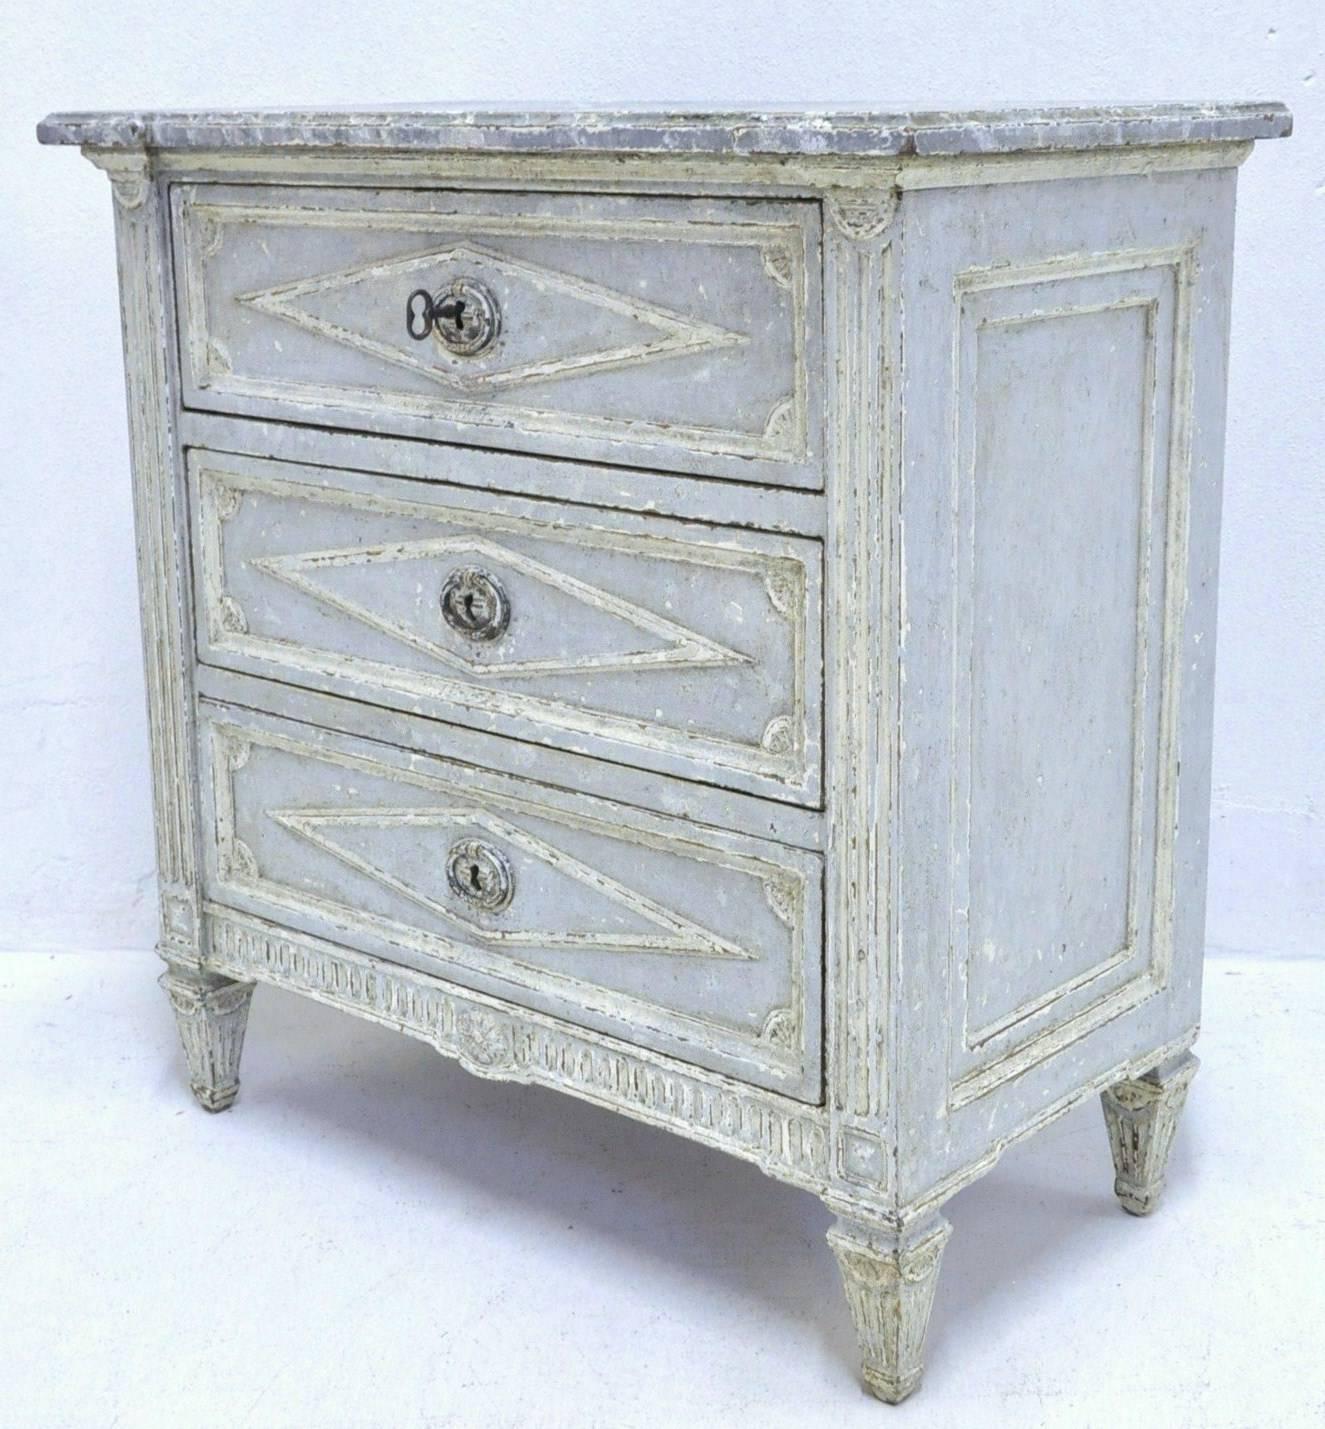 Add extra surface space and storage to your bedroom with this pair of Louis XVI style antique painted bedside tables crafted in France, circa 1870. The two nightstands chests both have a faux marble top in a neutral gray tone and feature three